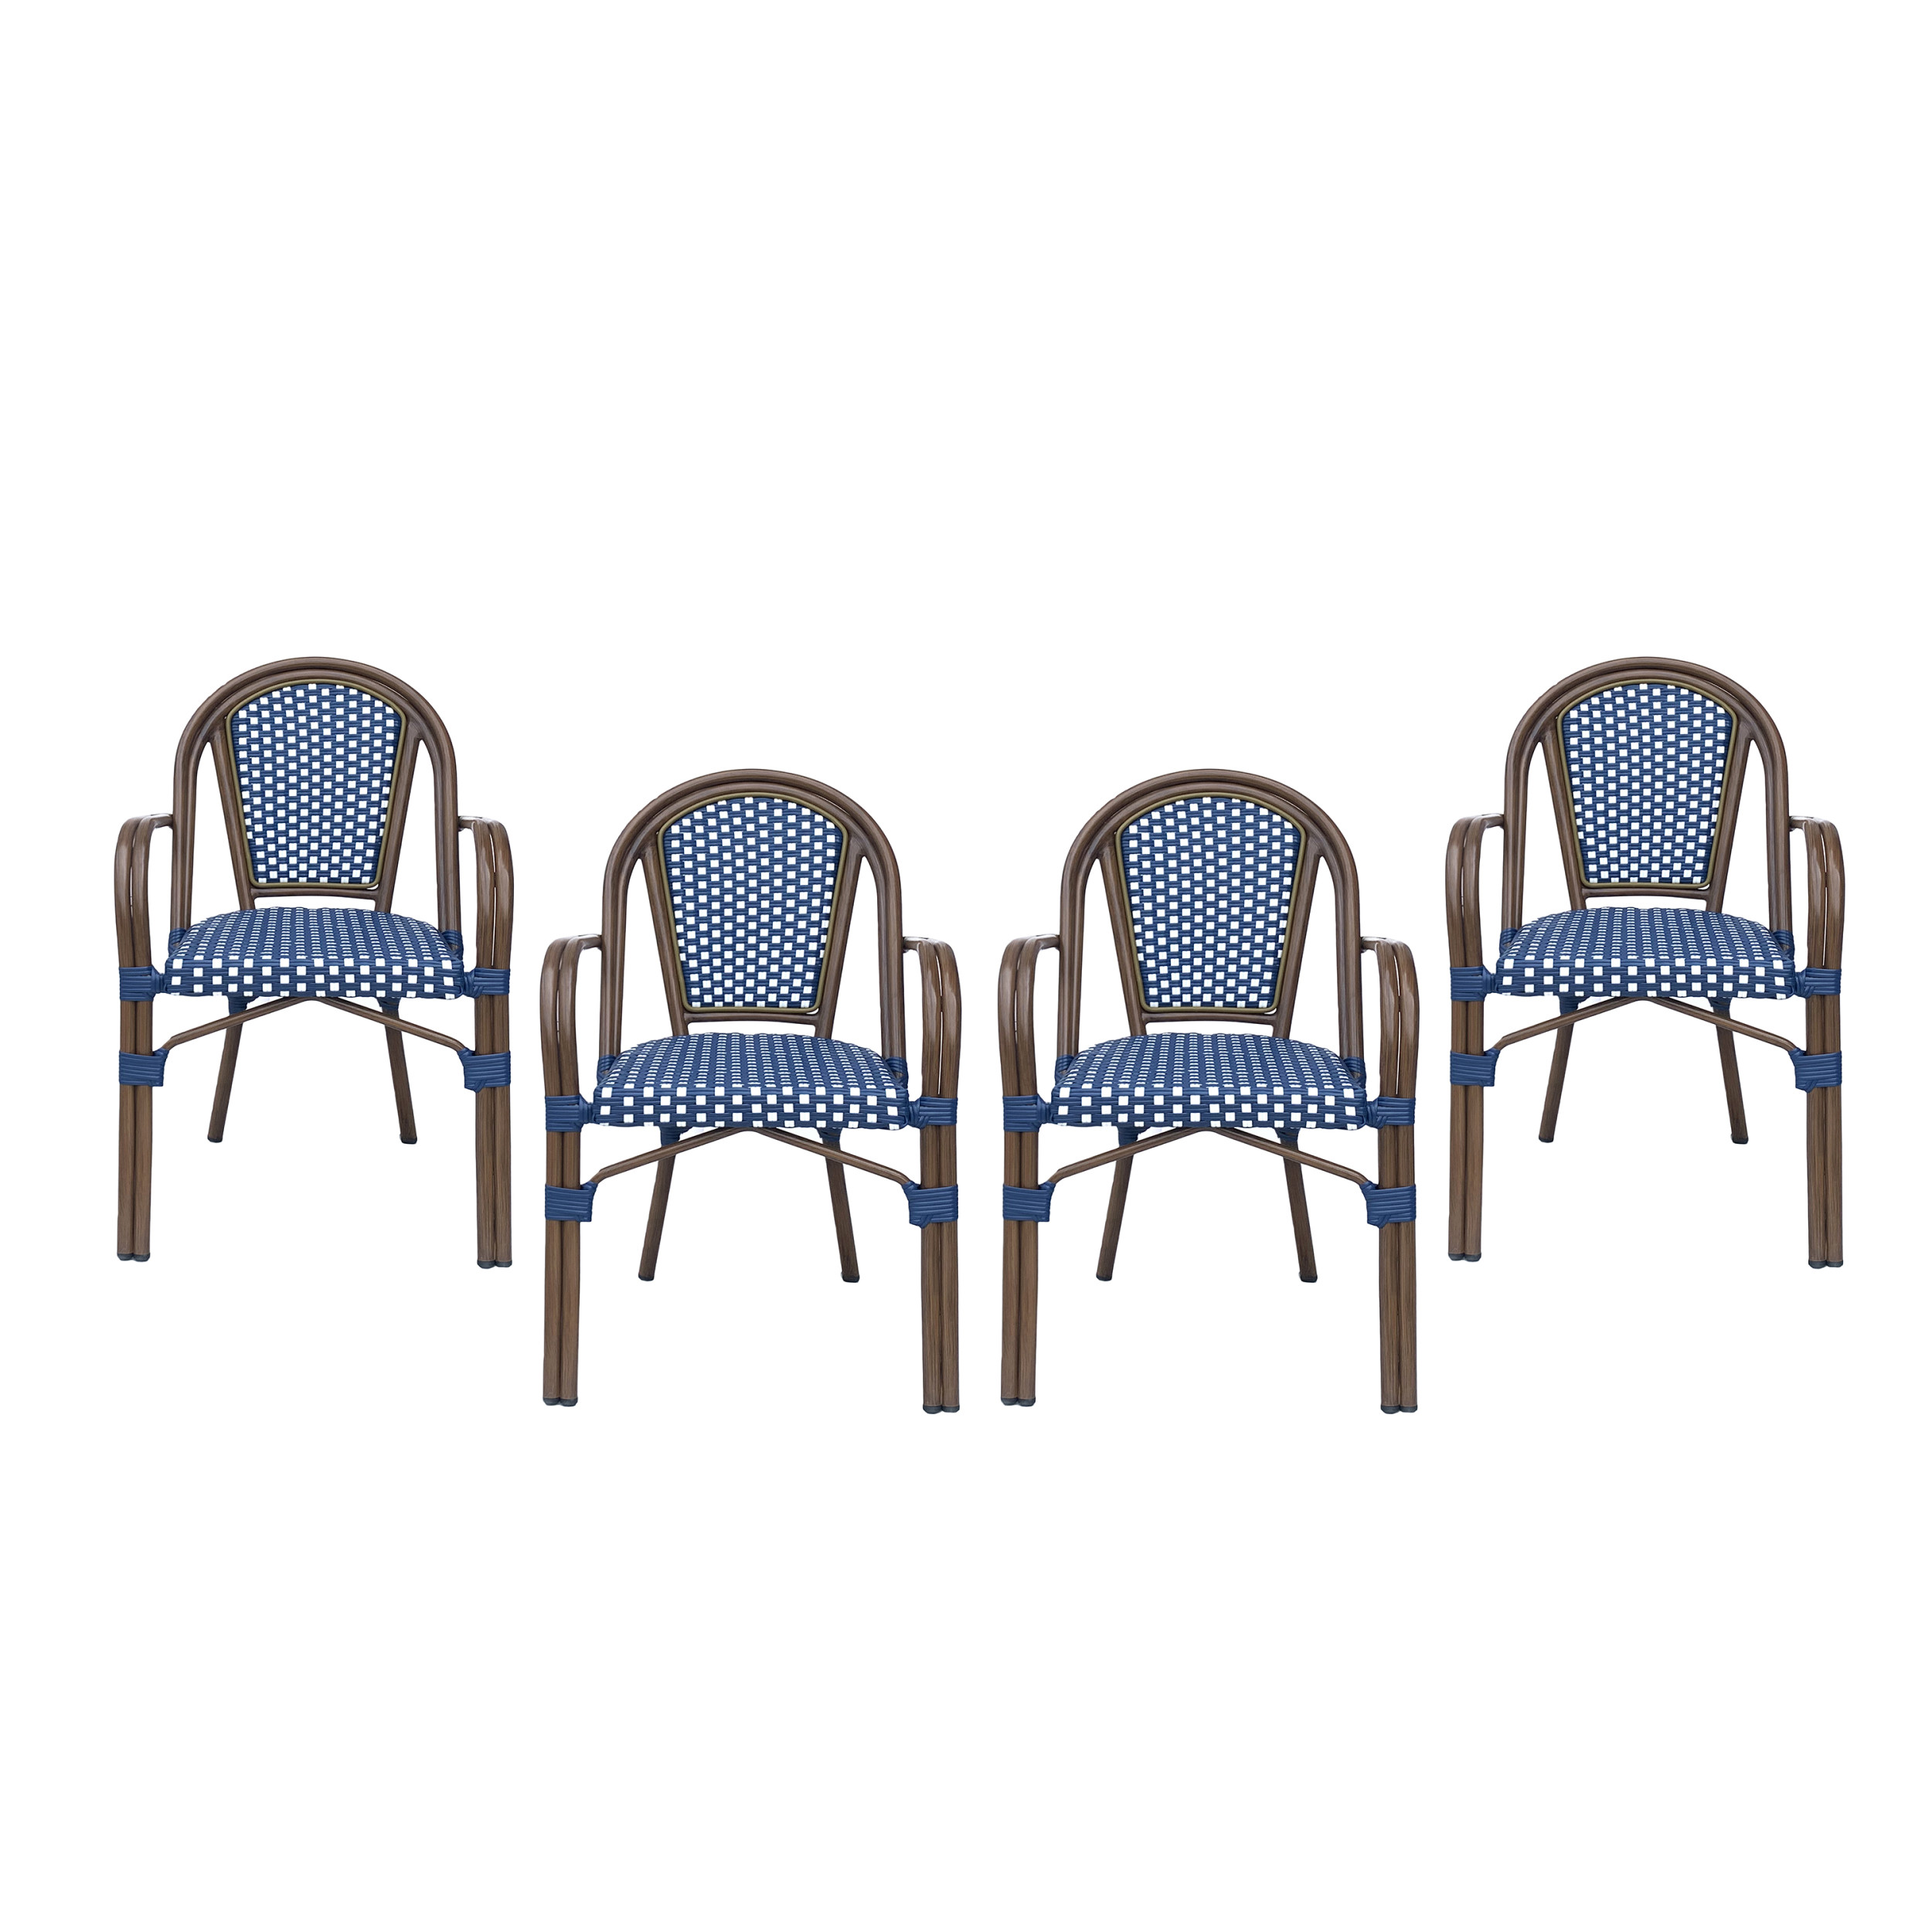 Cecil Aluminum and Wicker Outdoor French Bistro Chairs, Set of 4, Navy Blue, White, and Brown Wood - image 2 of 7